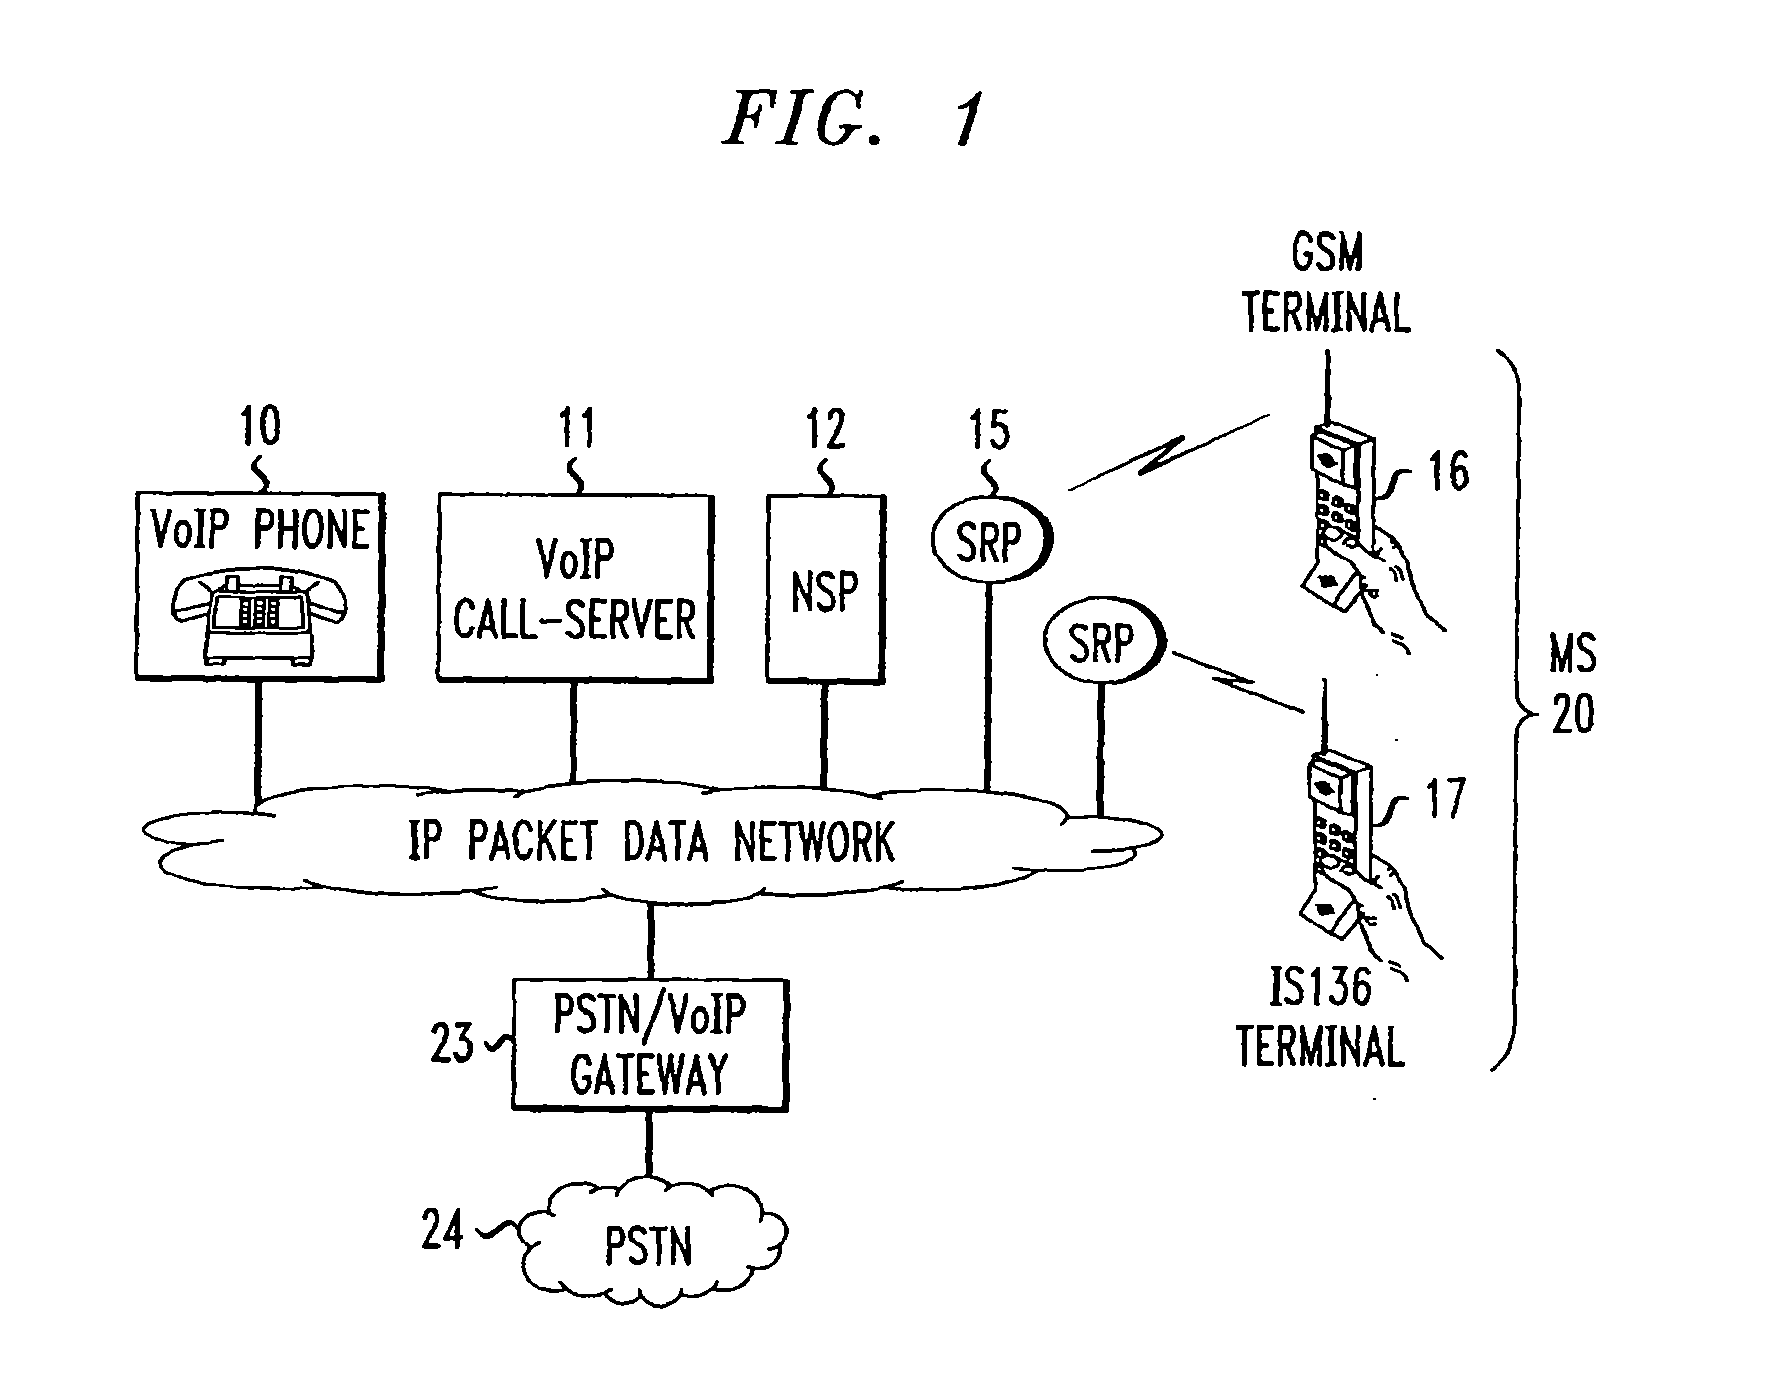 METHOD FOR PROVIDING VoIP SERVICES FOR WIRELESS TERMINALS